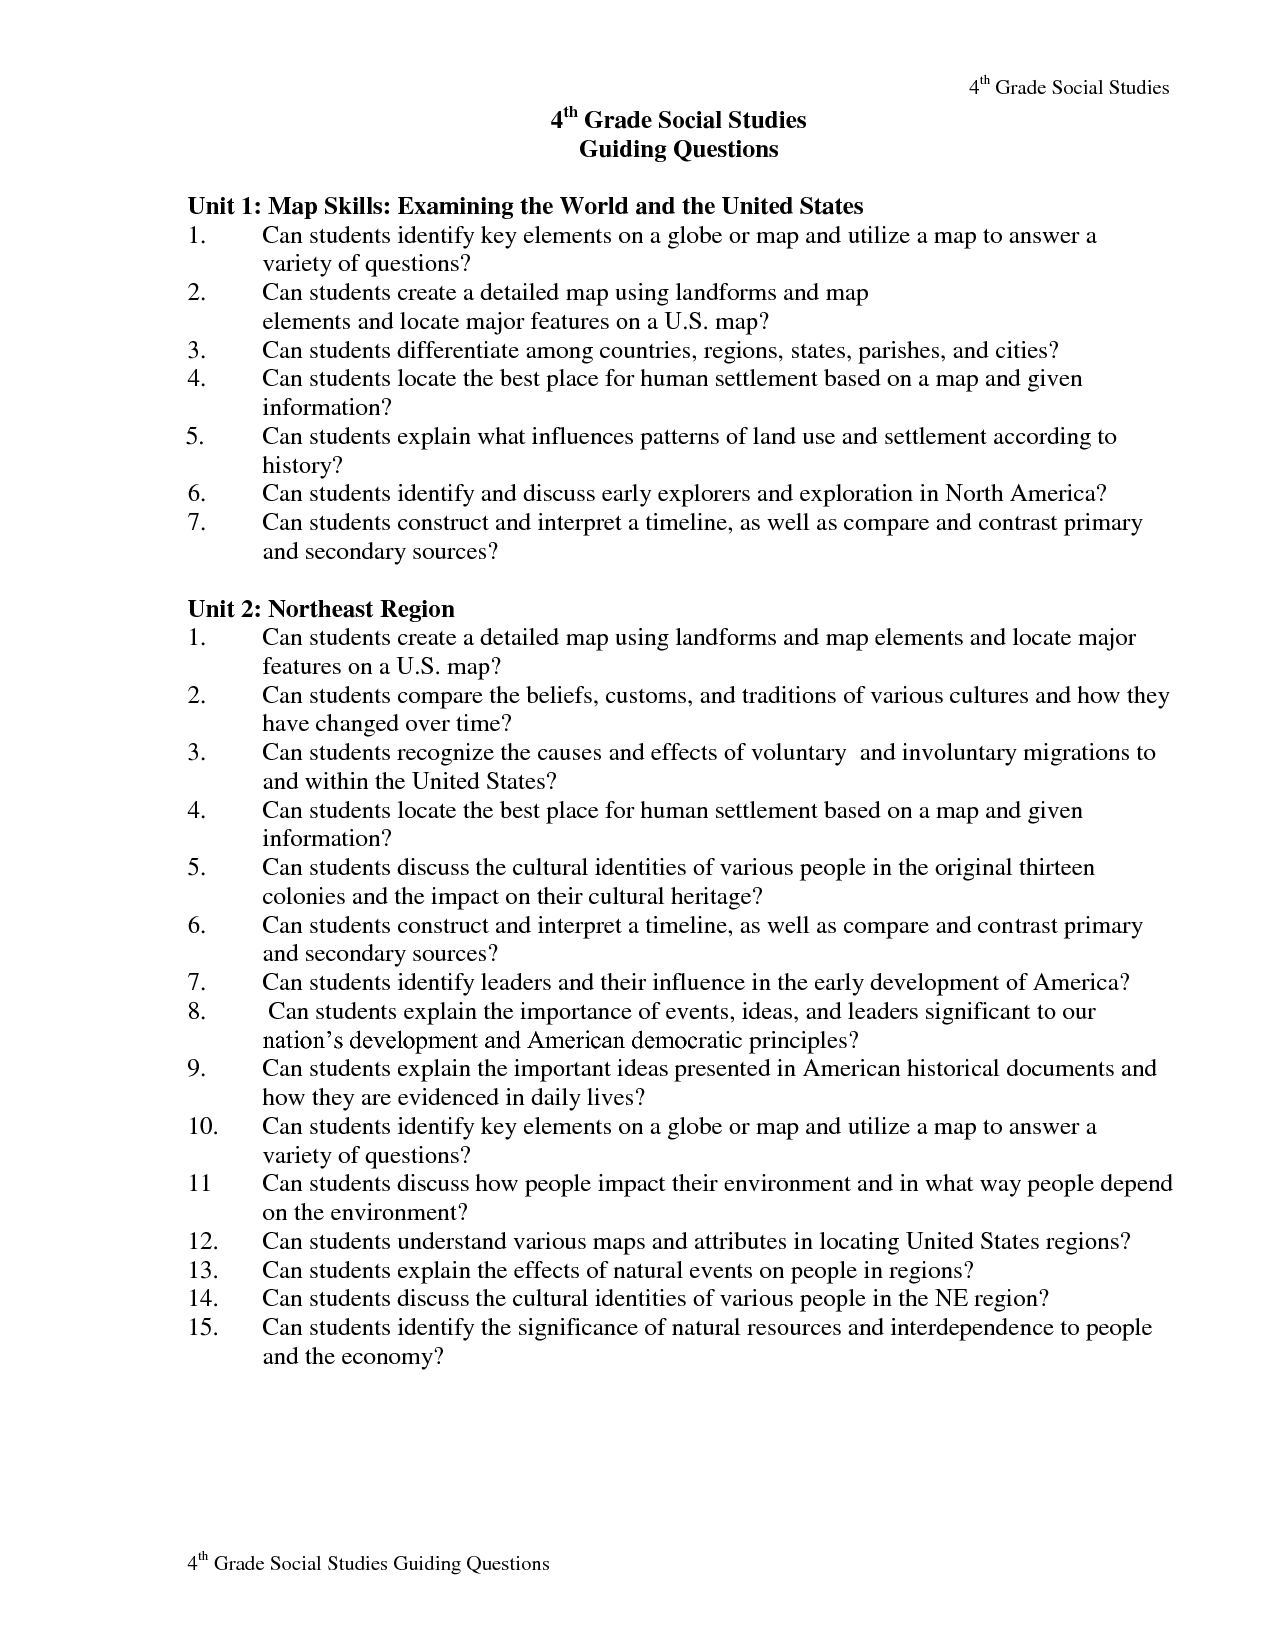 4th Grade Social Studies Printable Worksheets Free  1000 images about s worksheets on pinterest 